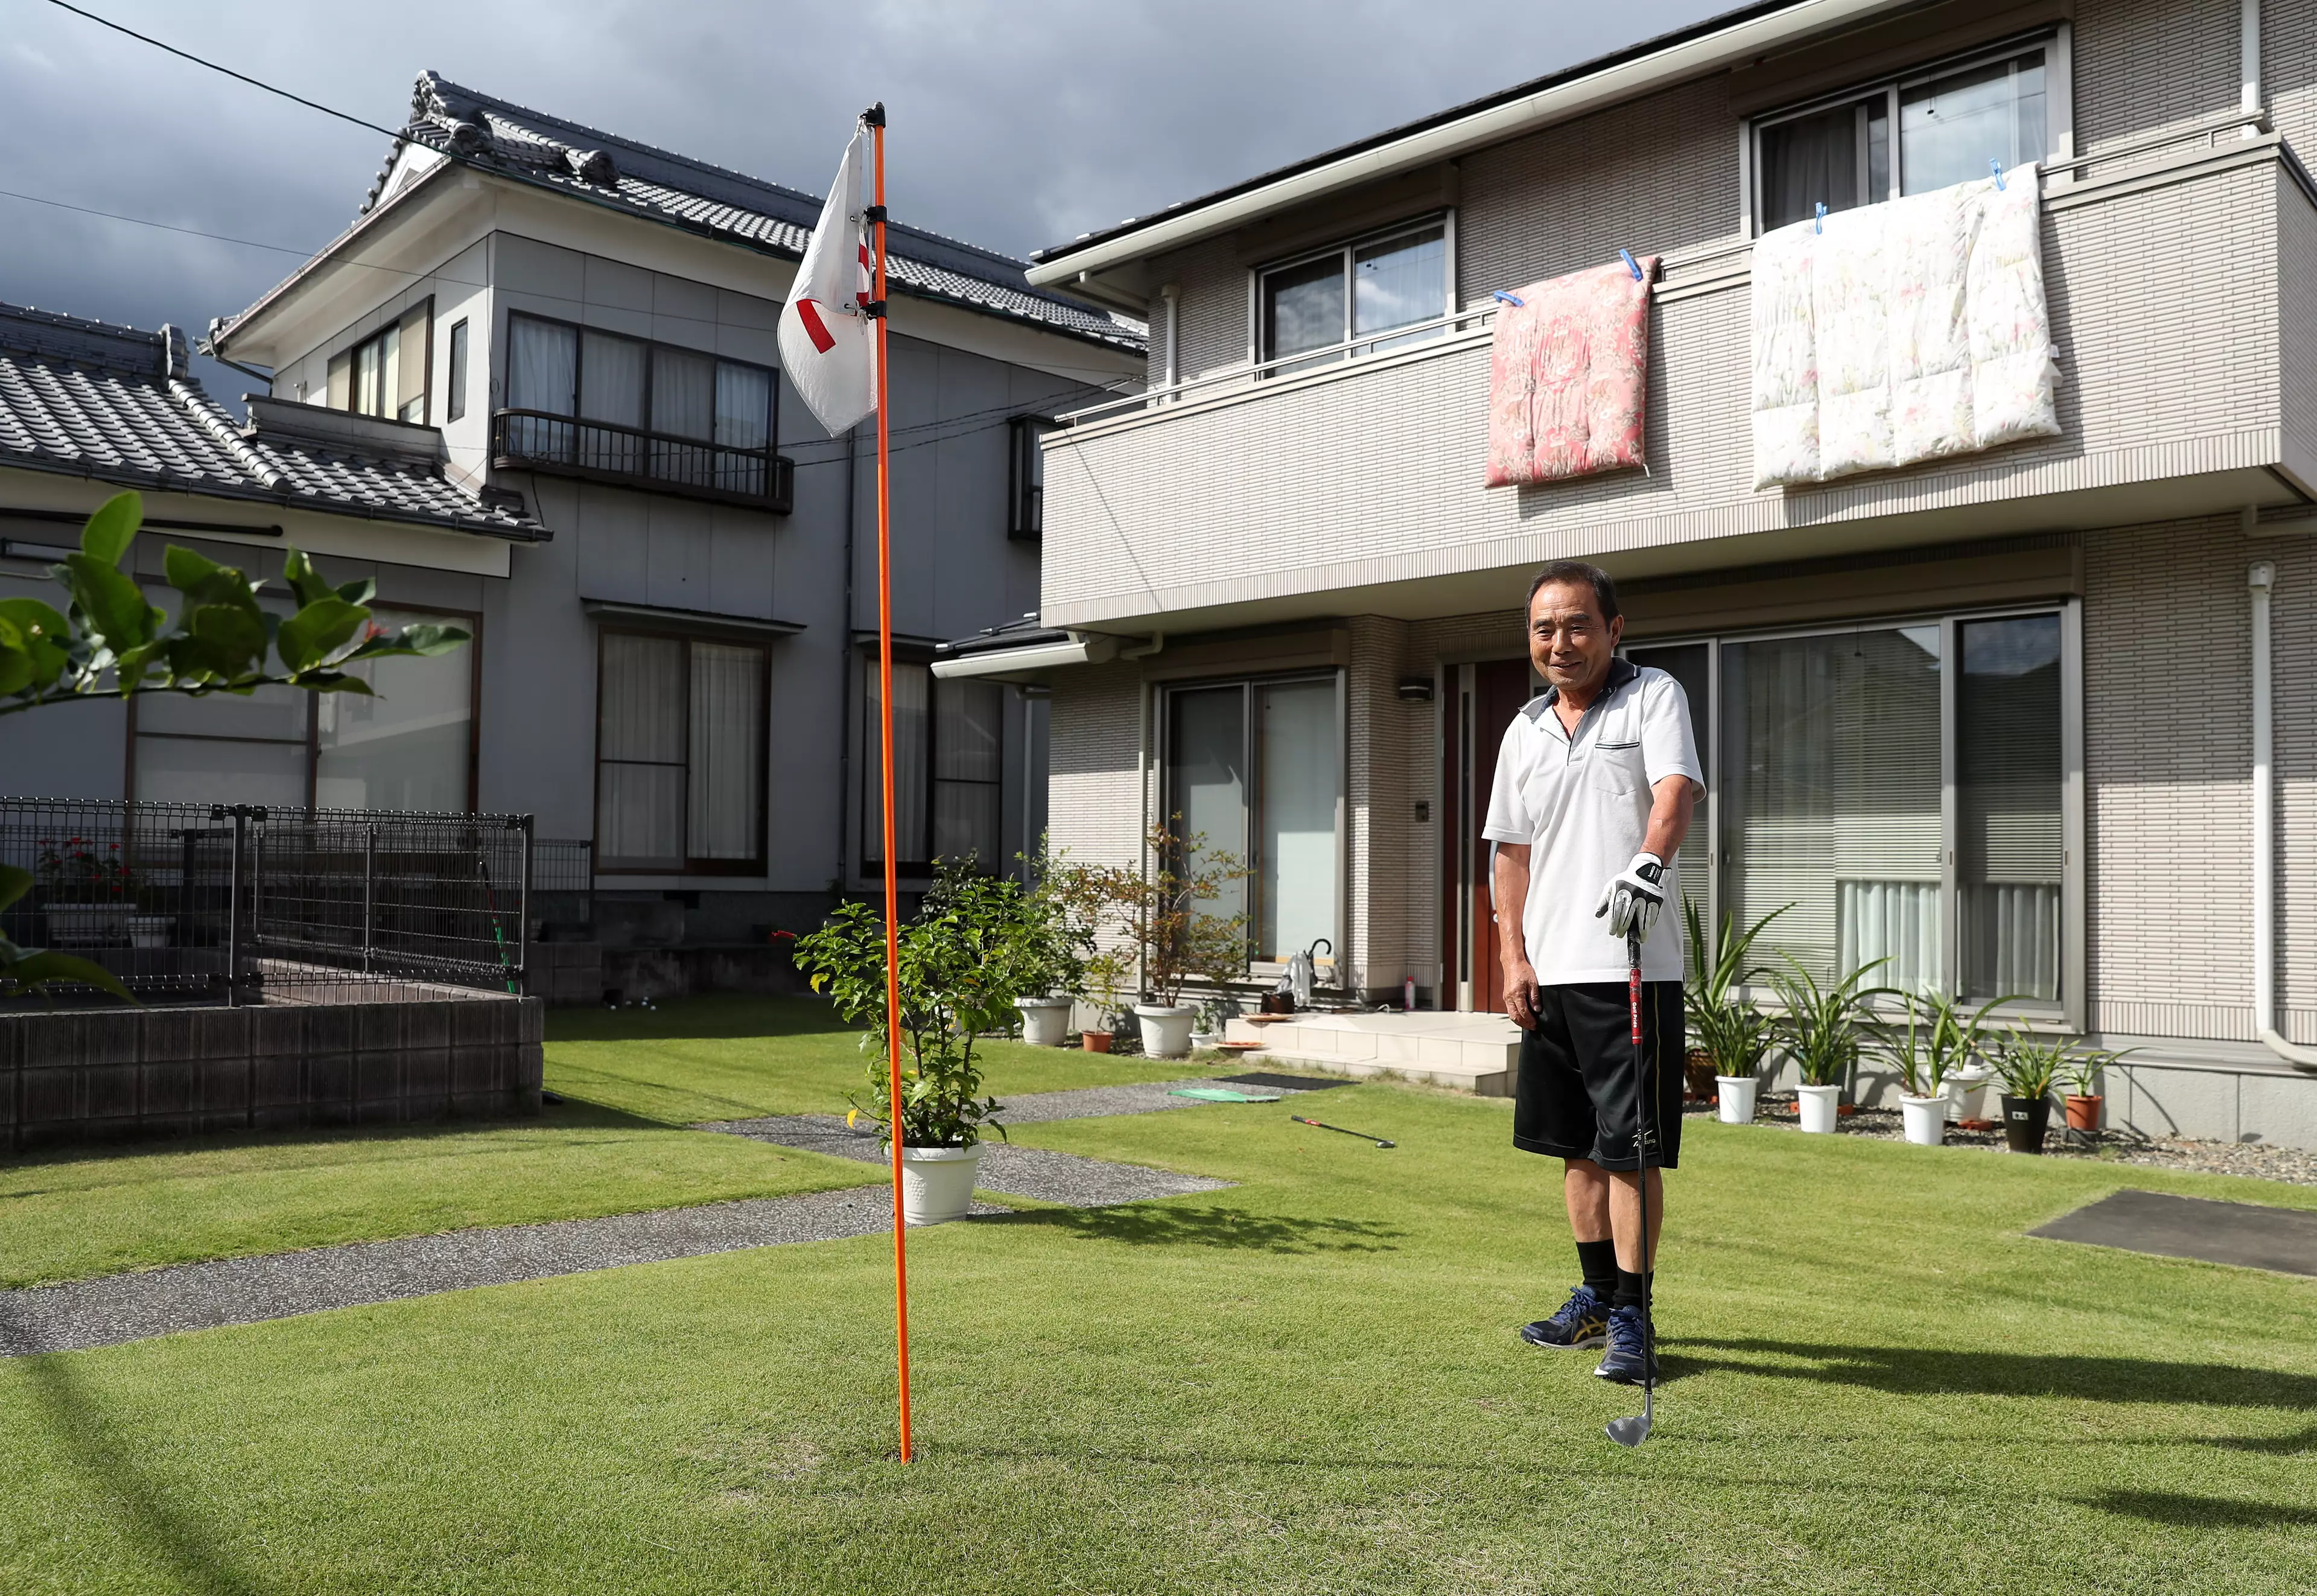 Just do what this bloke did to his front lawn: make your own golf course.